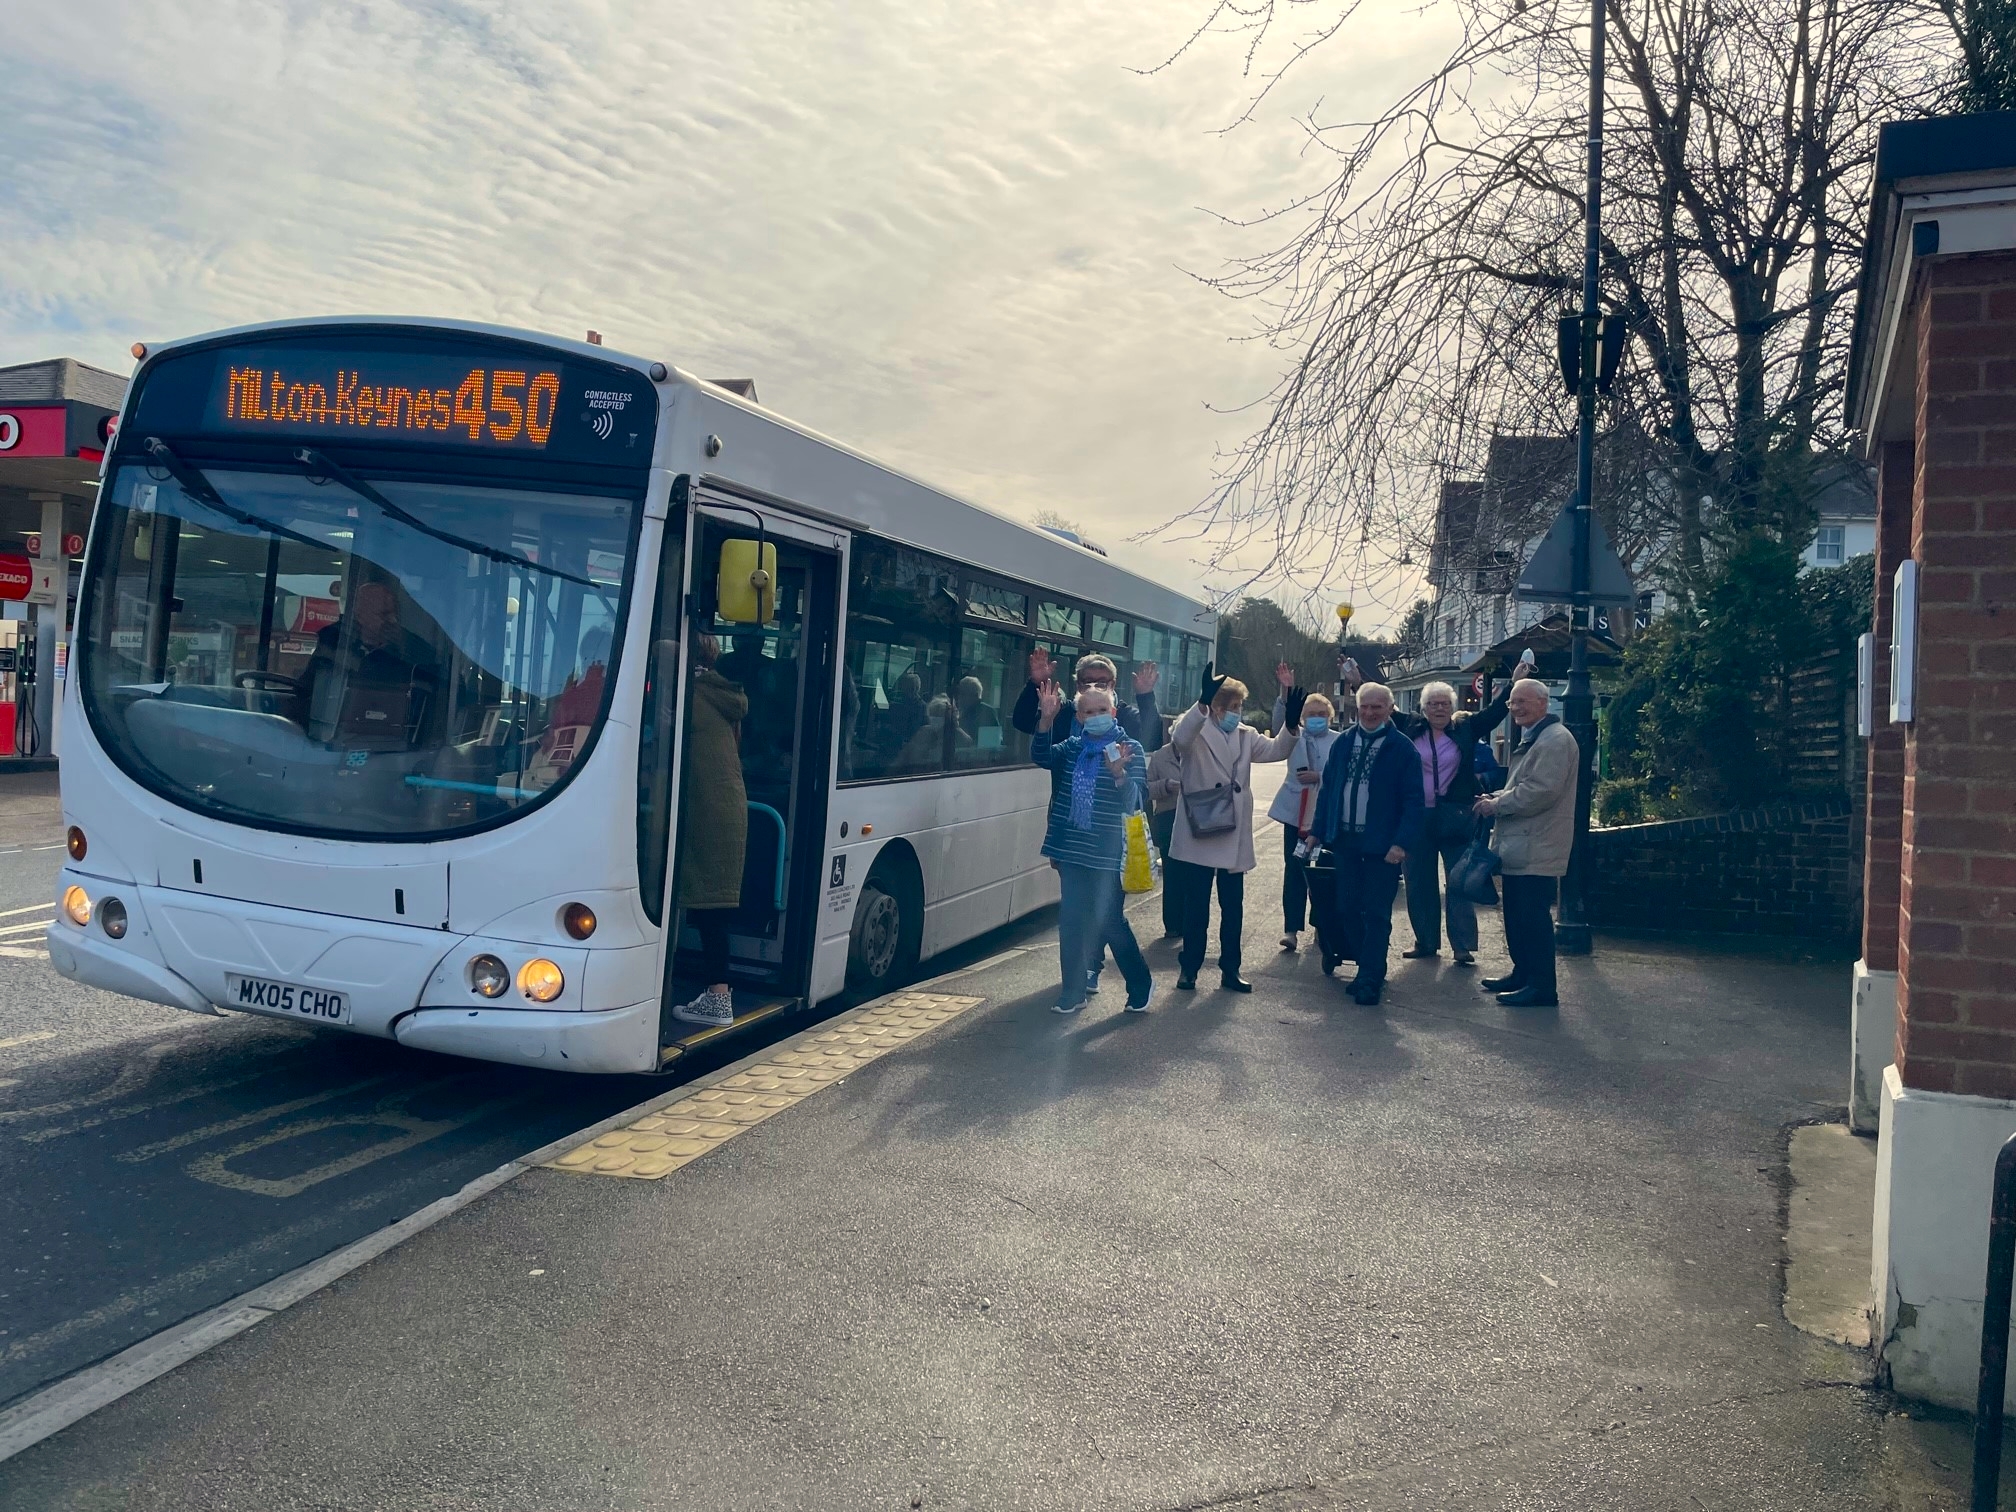 Woburn Sands has a new bus service!